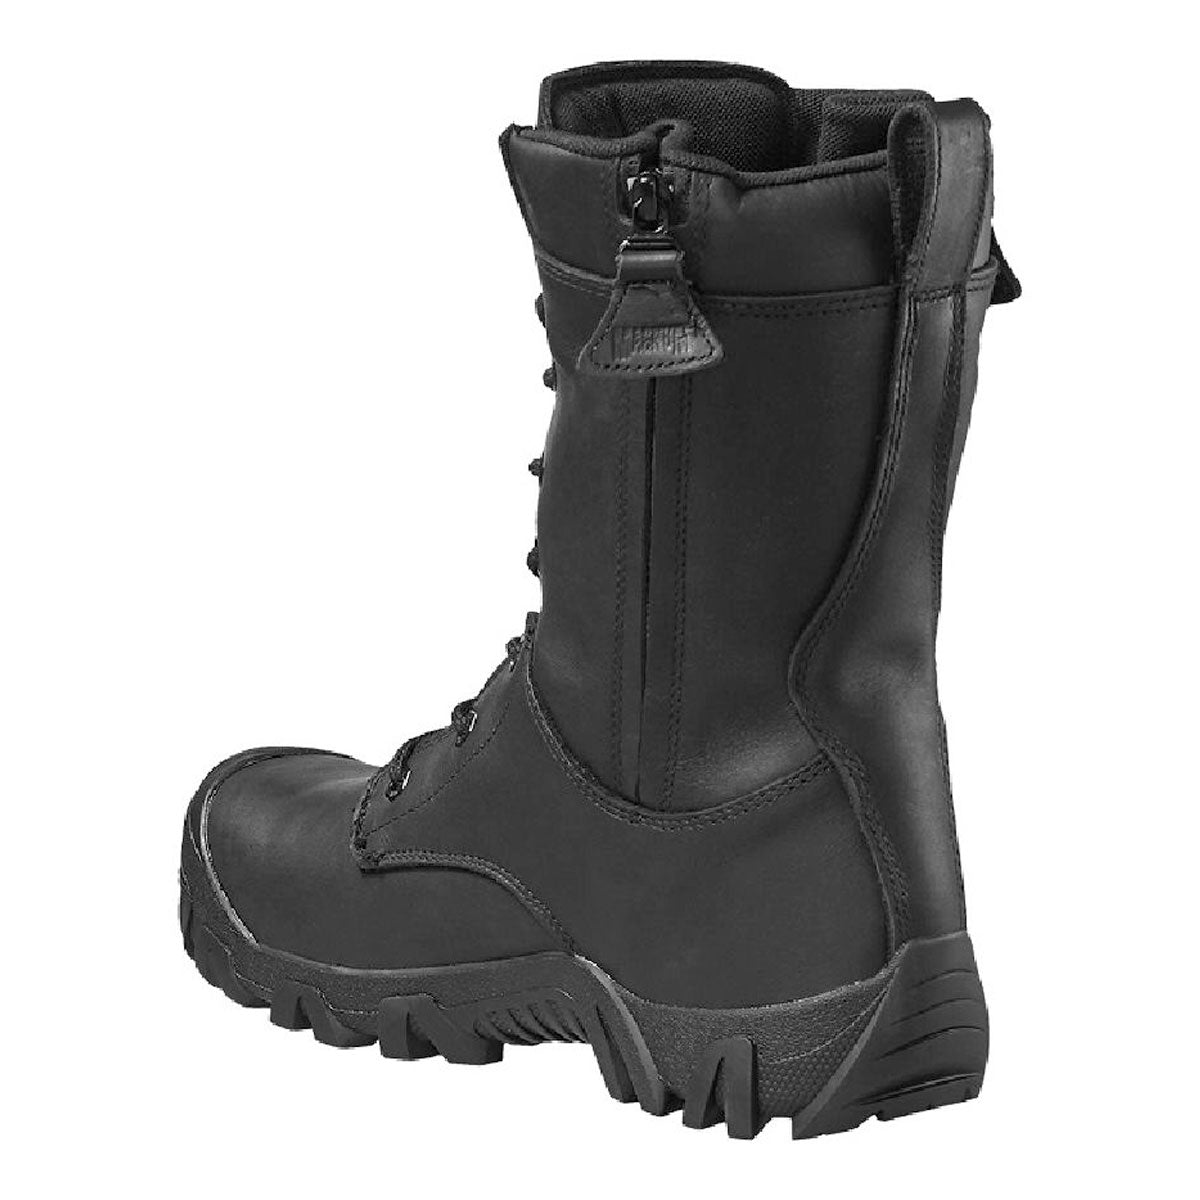 Magnum Vulcan PRO Leather Double Side-Zip Composite Toe and Plate Waterproof Boot Footwear Magnum Footwear Tactical Gear Supplier Tactical Distributors Australia